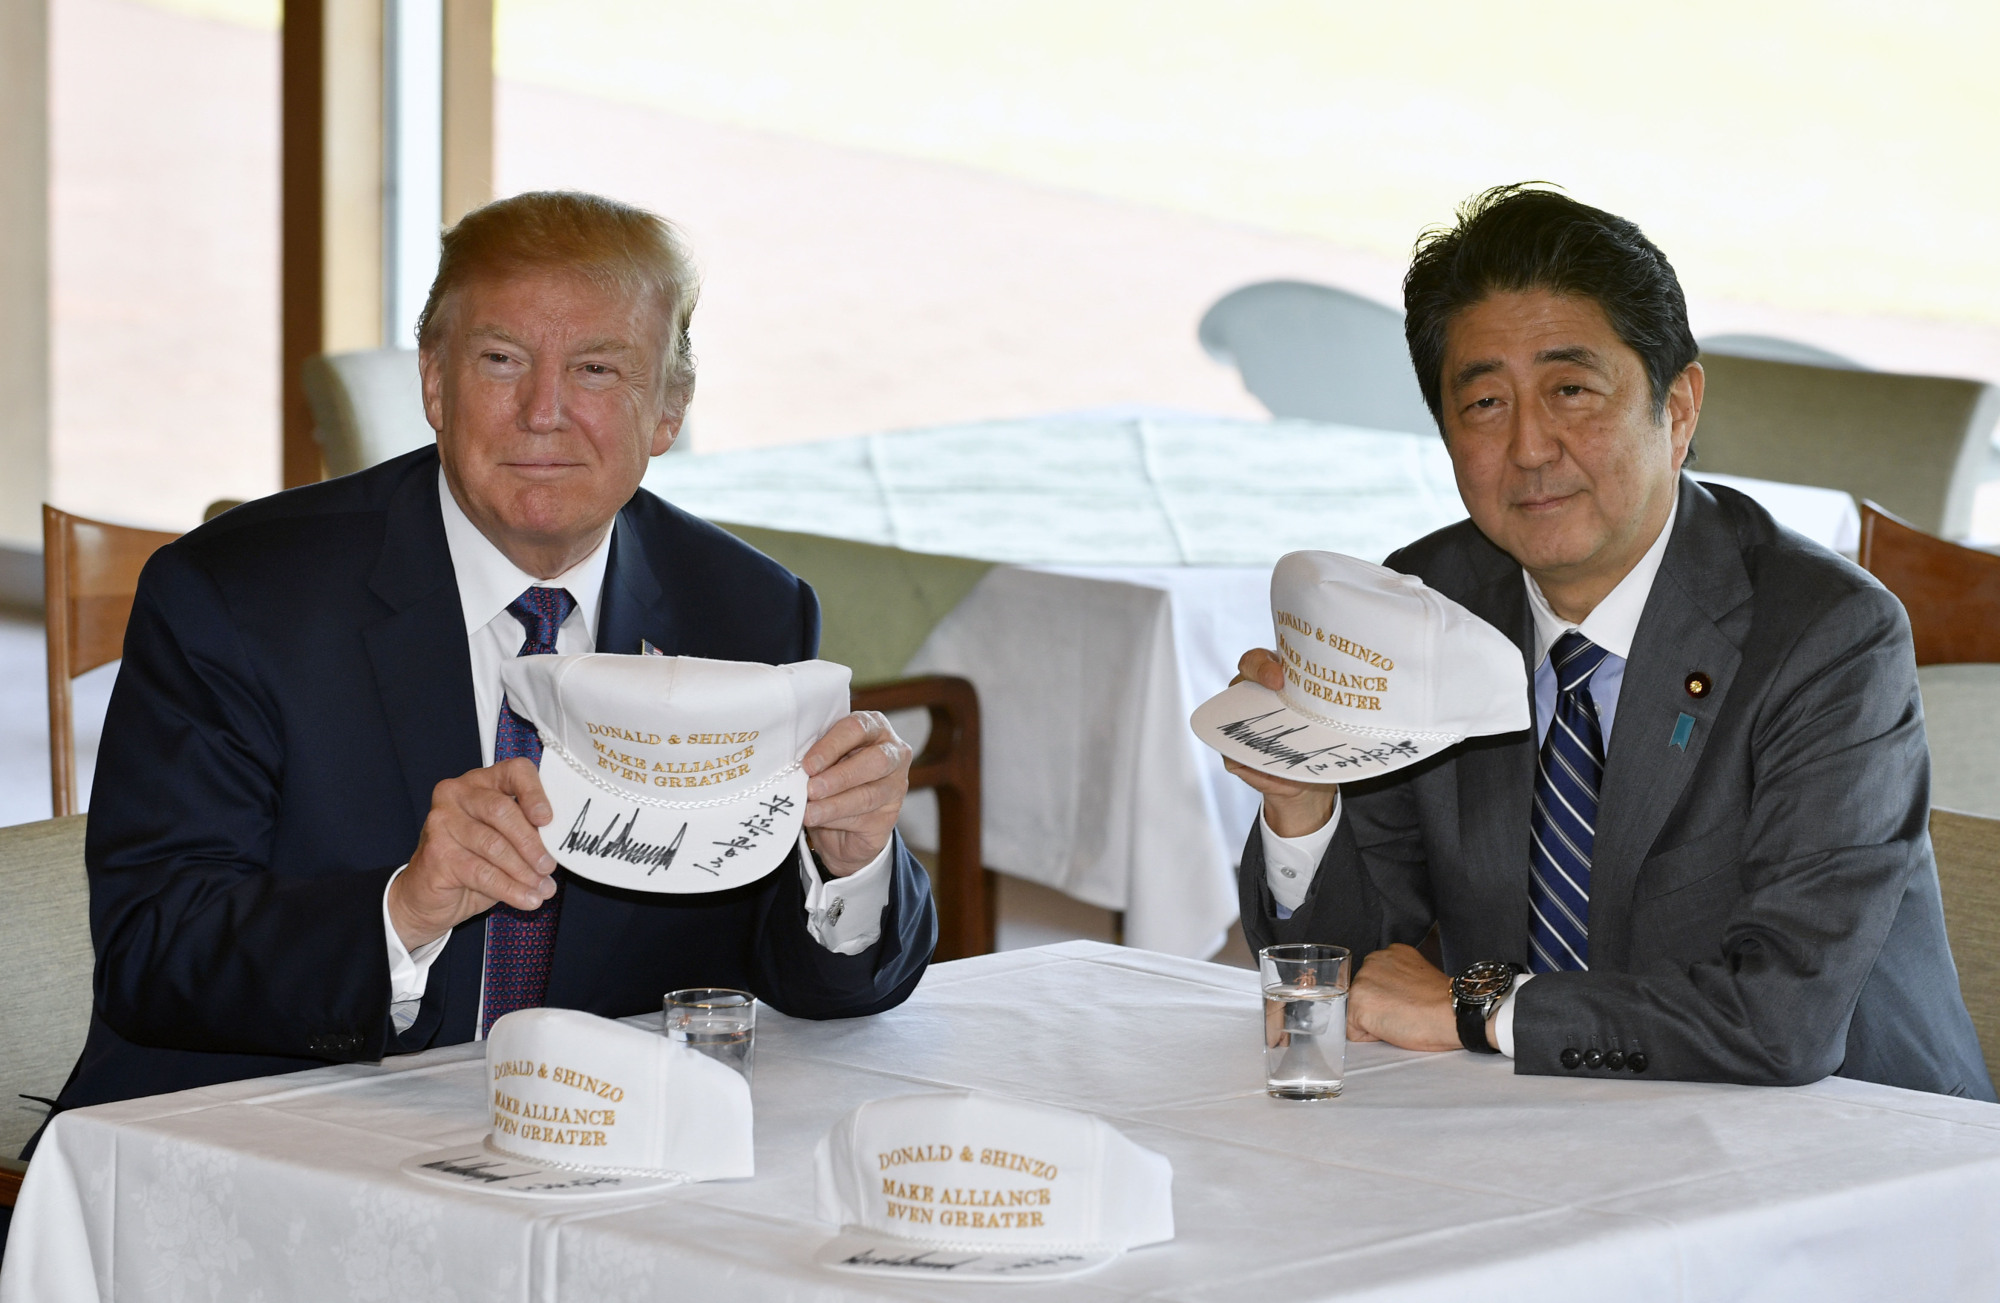 Trump and Abe pose after signing hats reading 'Donald and Shinzo, Make Alliance Even Greater' at the Kasumigaseki Country Club in Kawagoe, near Tokyo, on Nov. 5. | AP